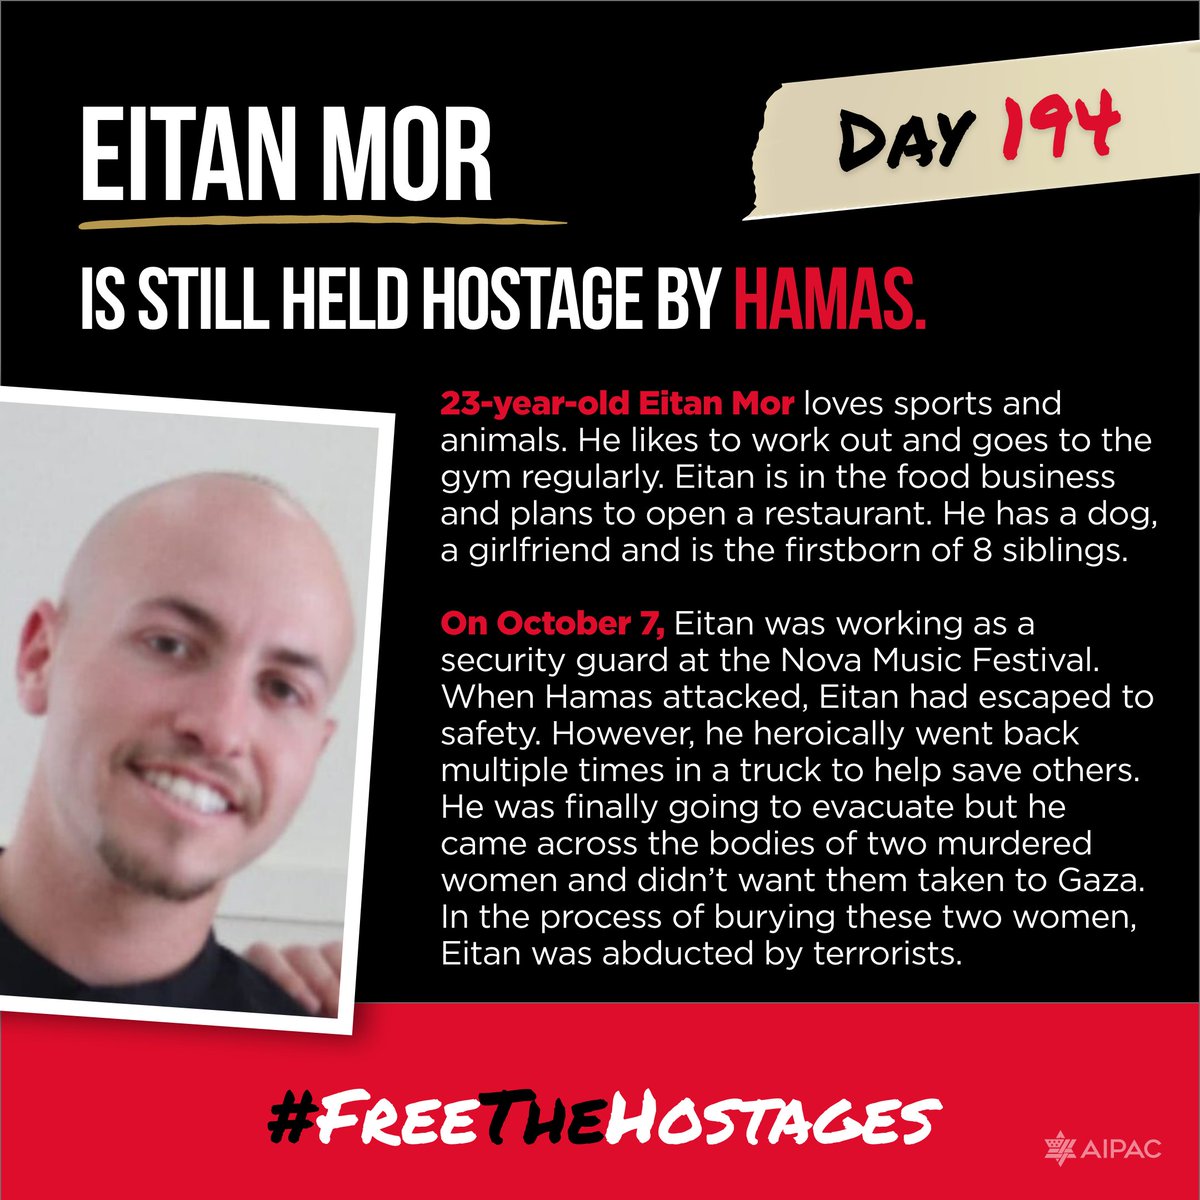 194 days. Eitan Mor is still held hostage by Hamas. Share his story. #FreeTheHostages @bringhomenow